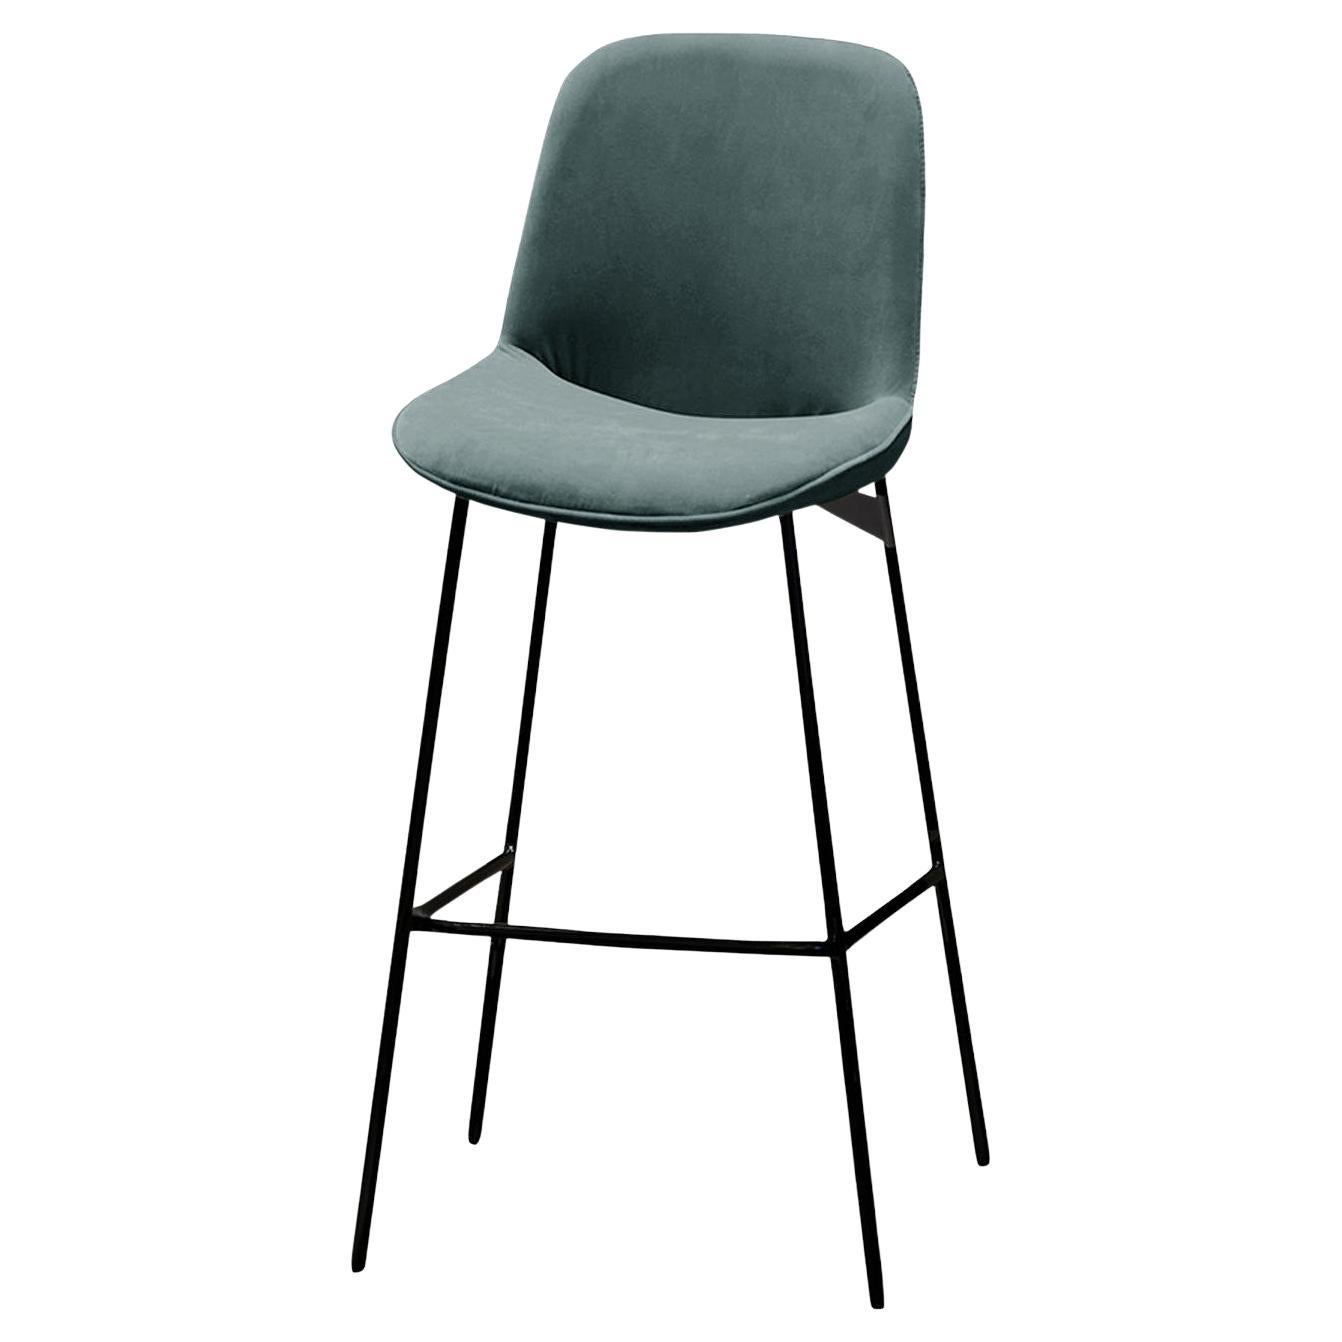 Chiado Bar Stool, Eucalyptus Leather with Teal and Black For Sale